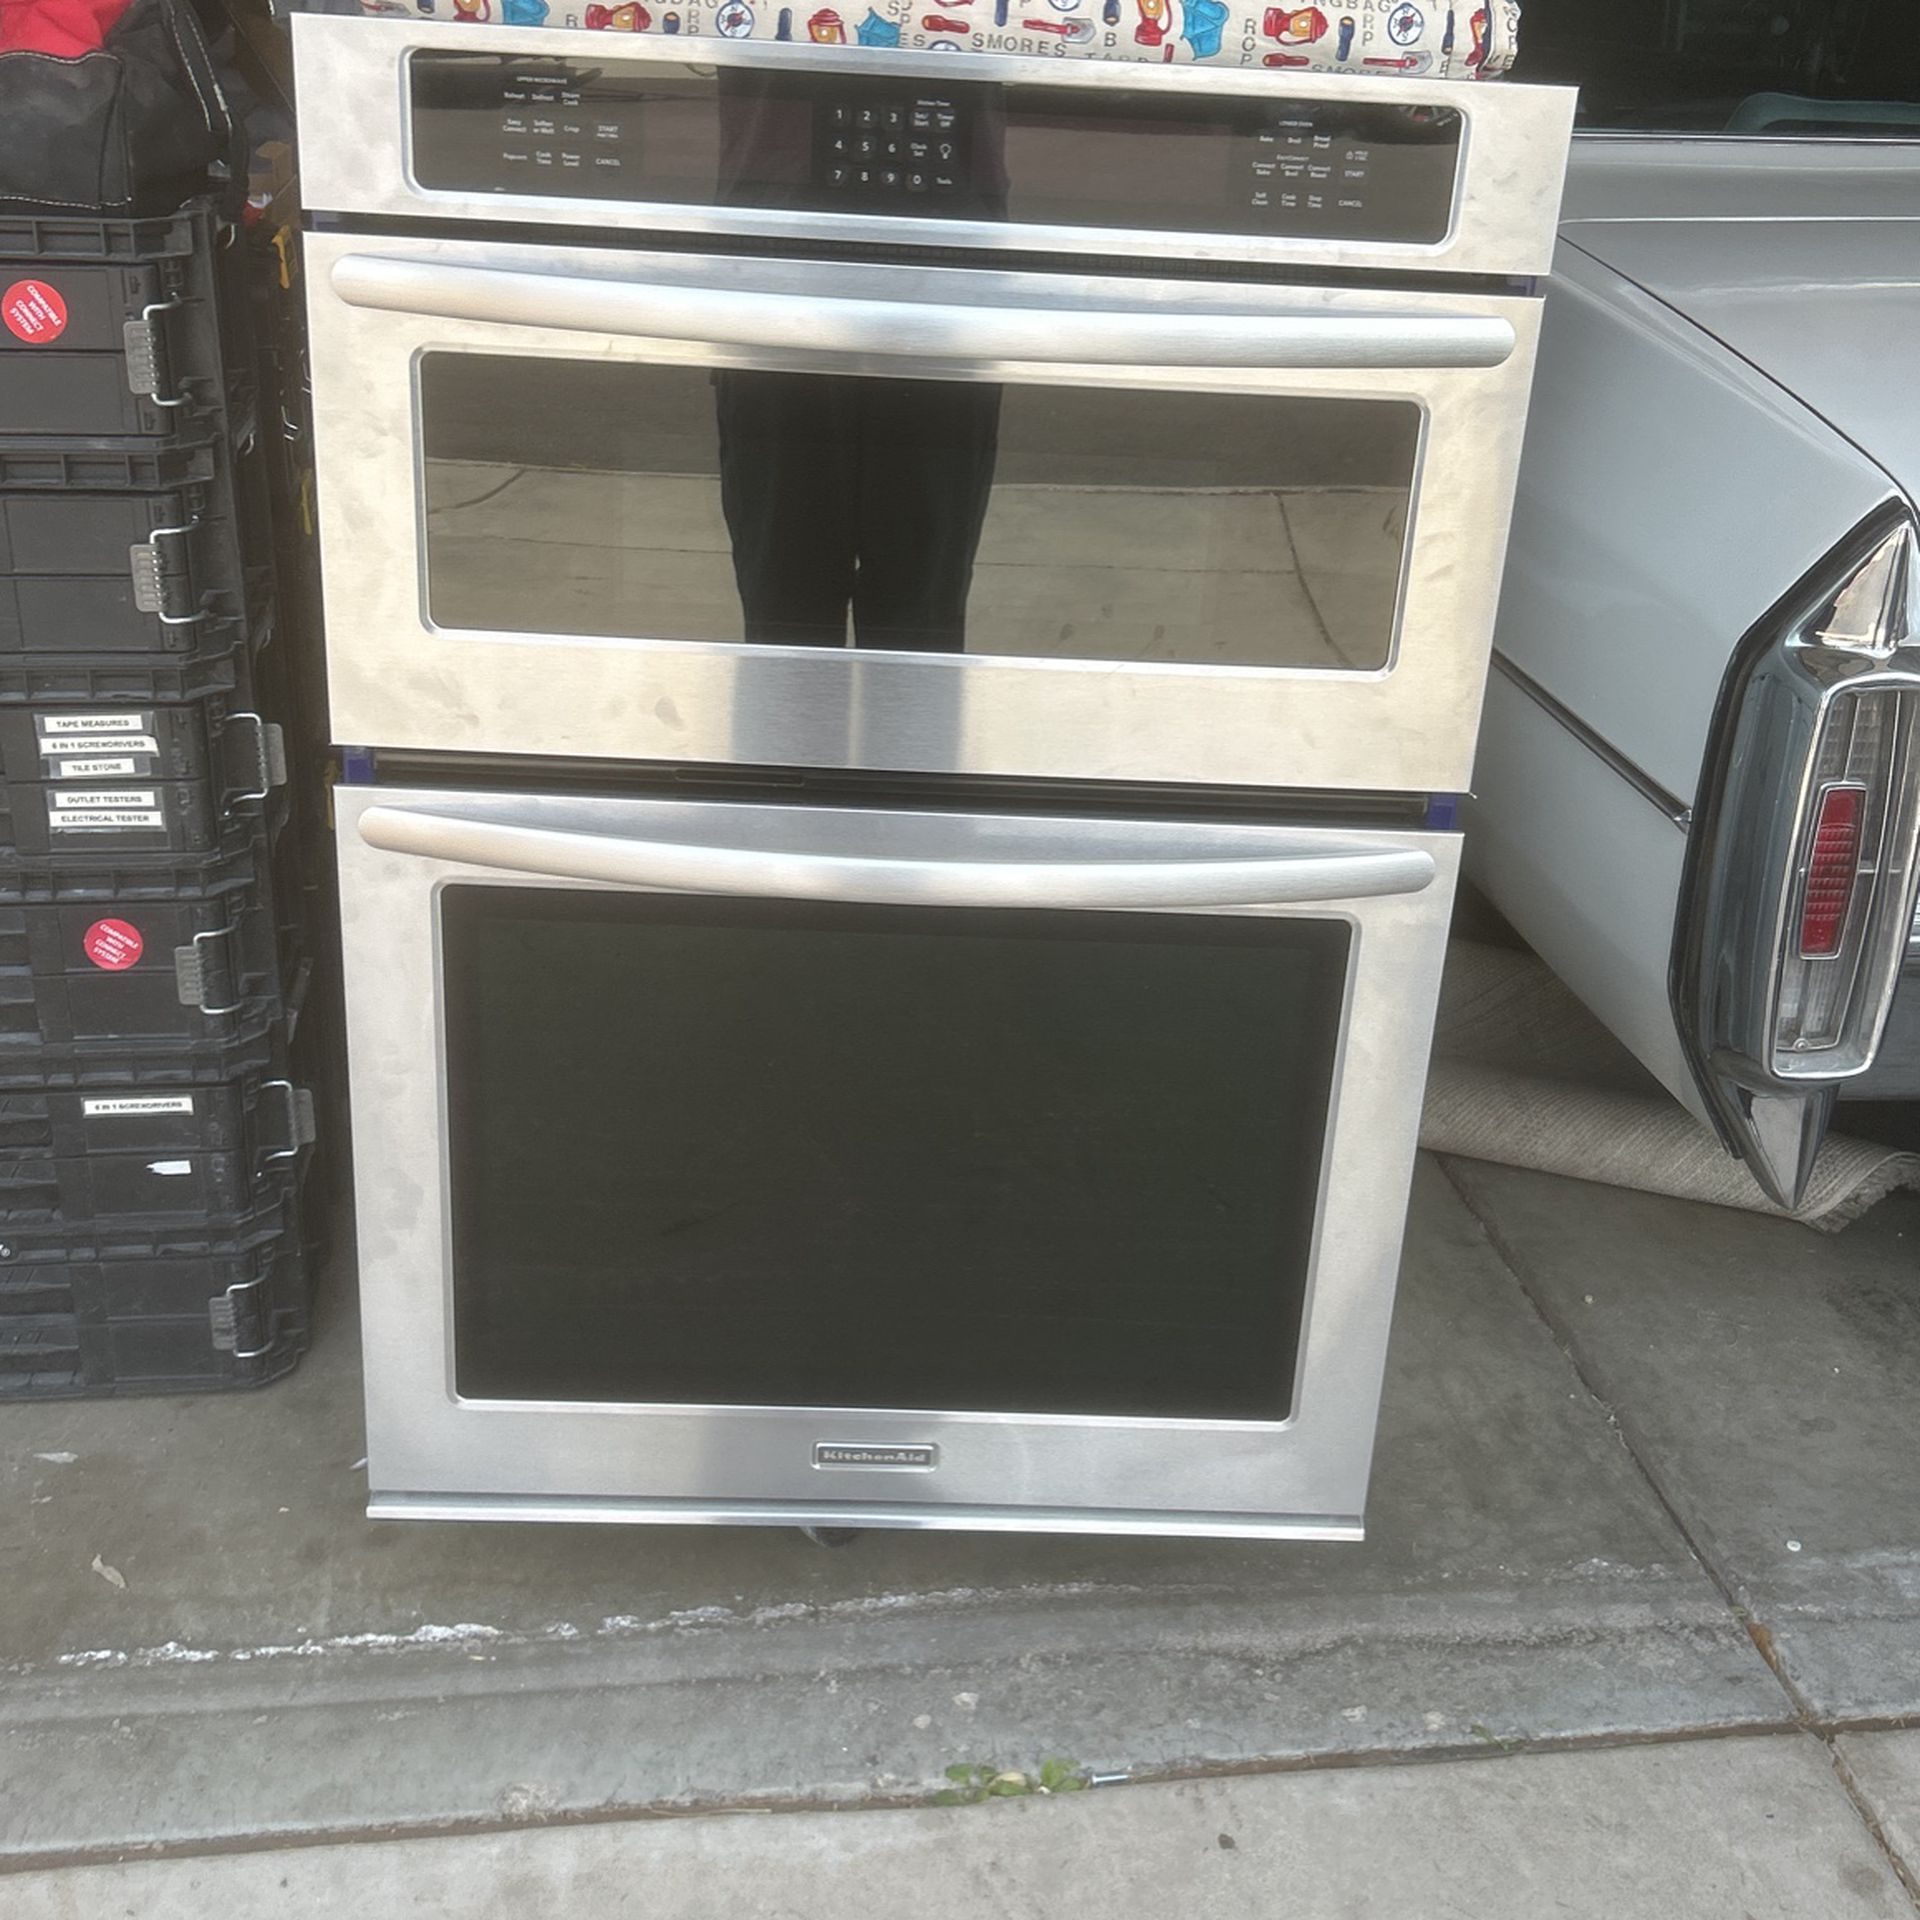 Oven Microwave Combo